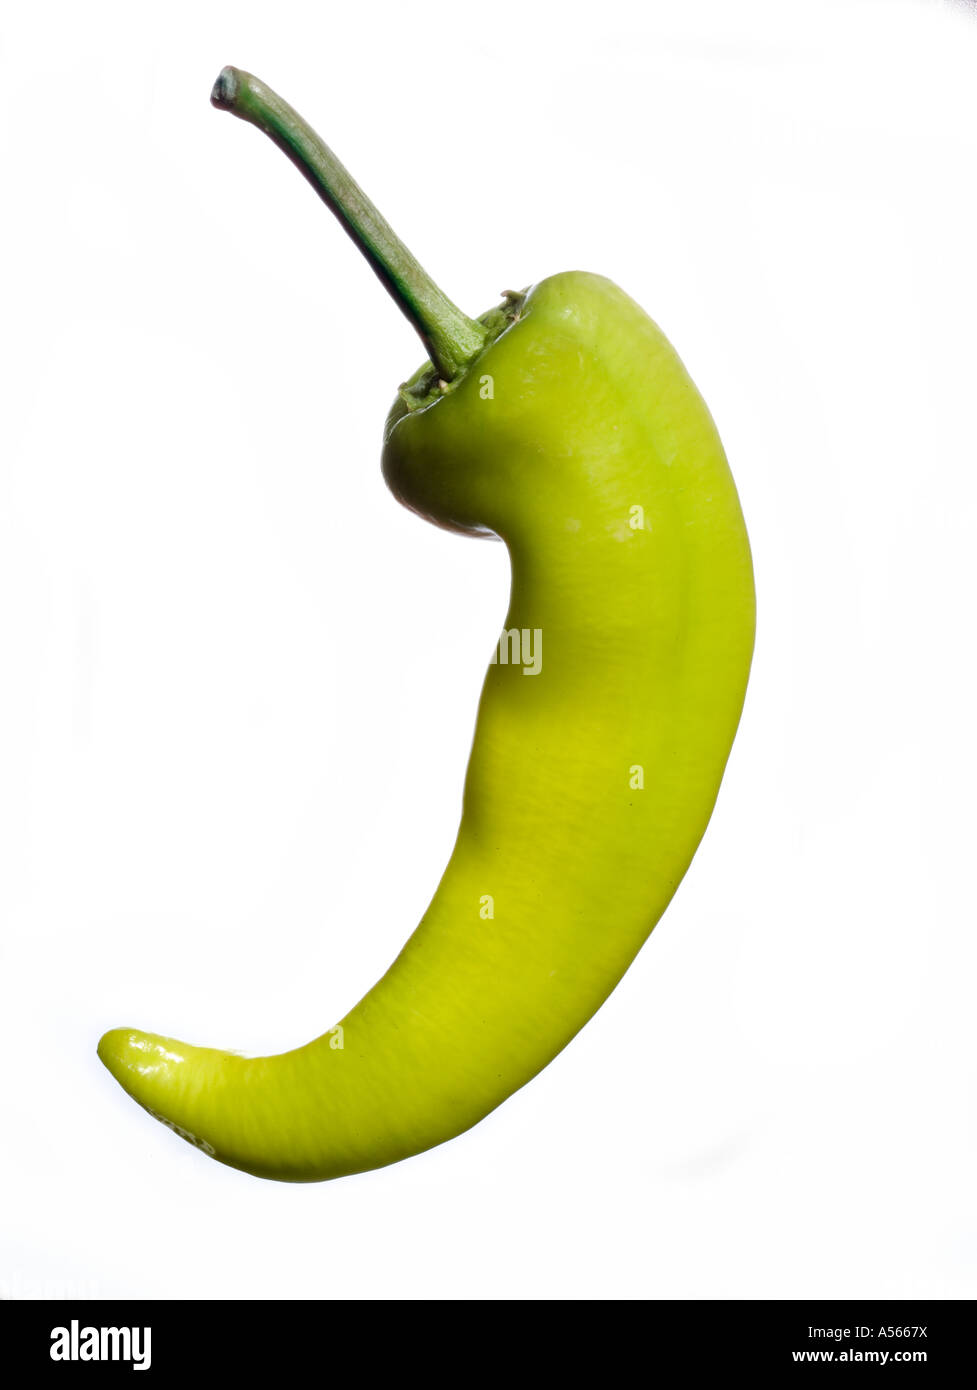 hungarian wax pepper on a white background Stock Photo